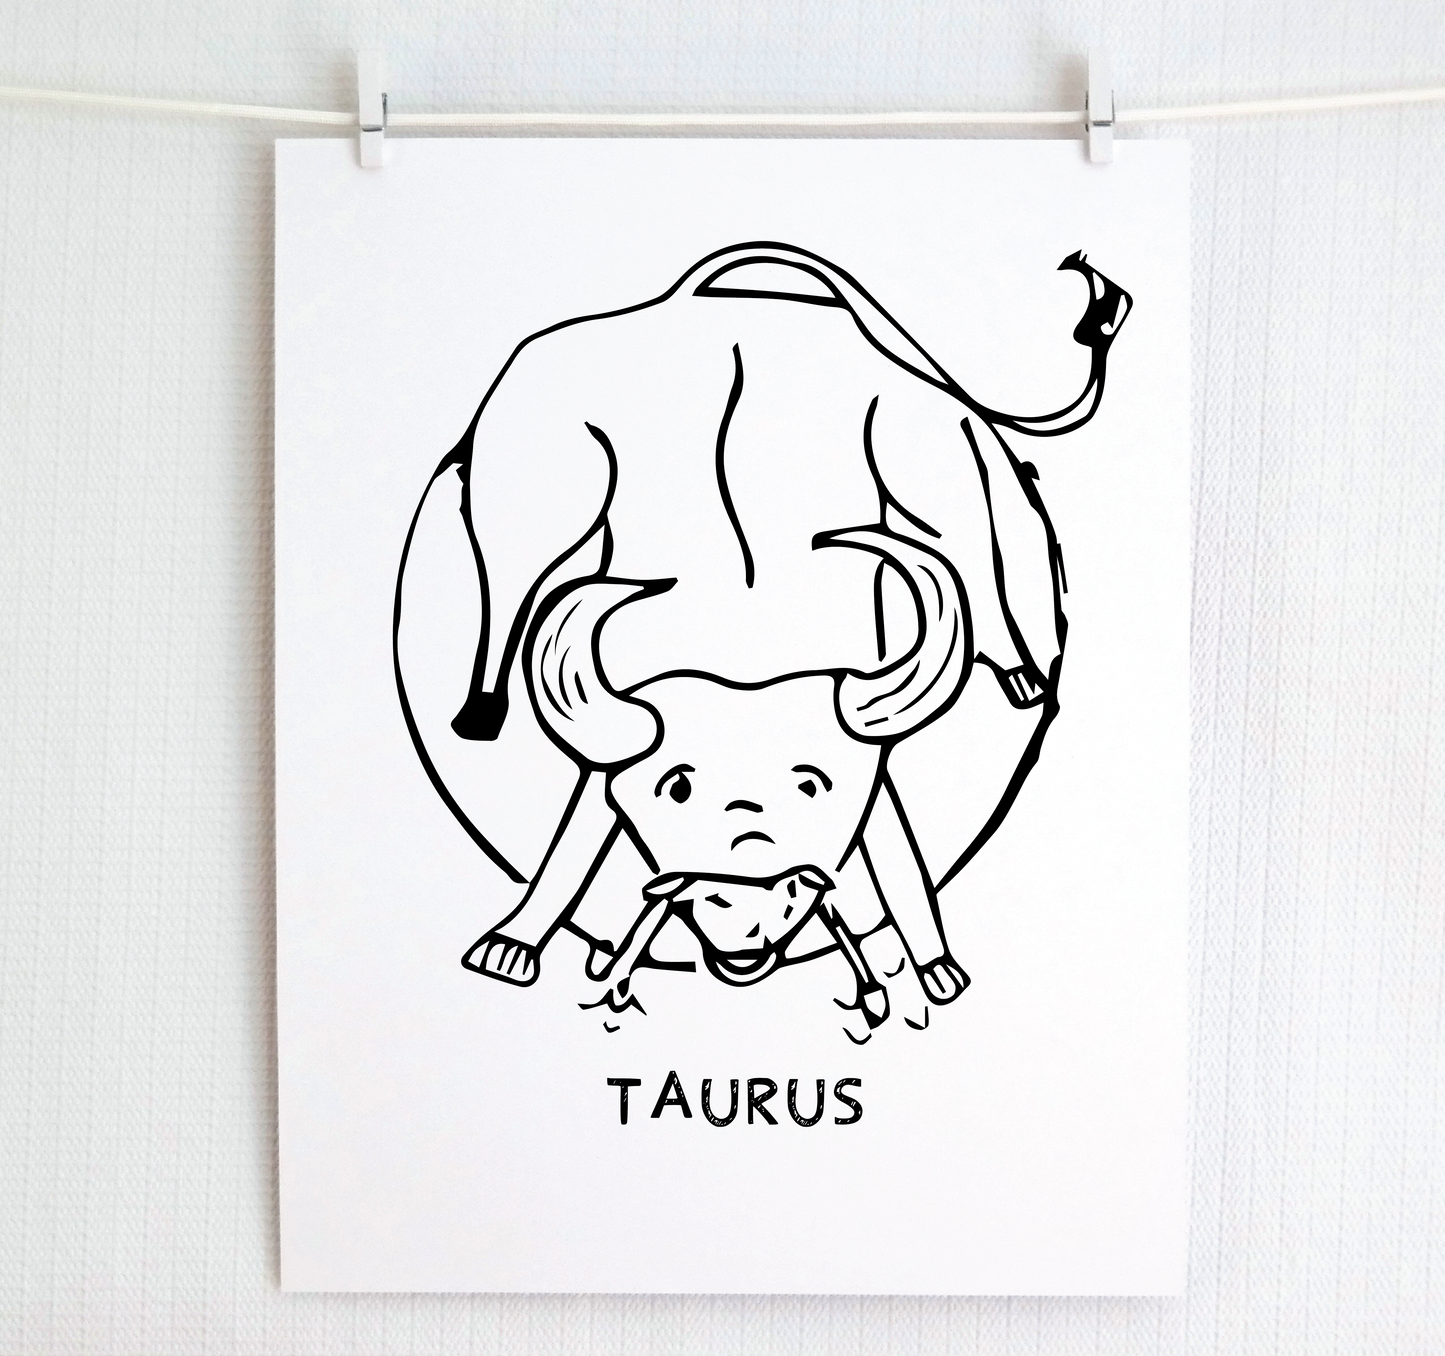 Signs of the Zodiac: TAURUS